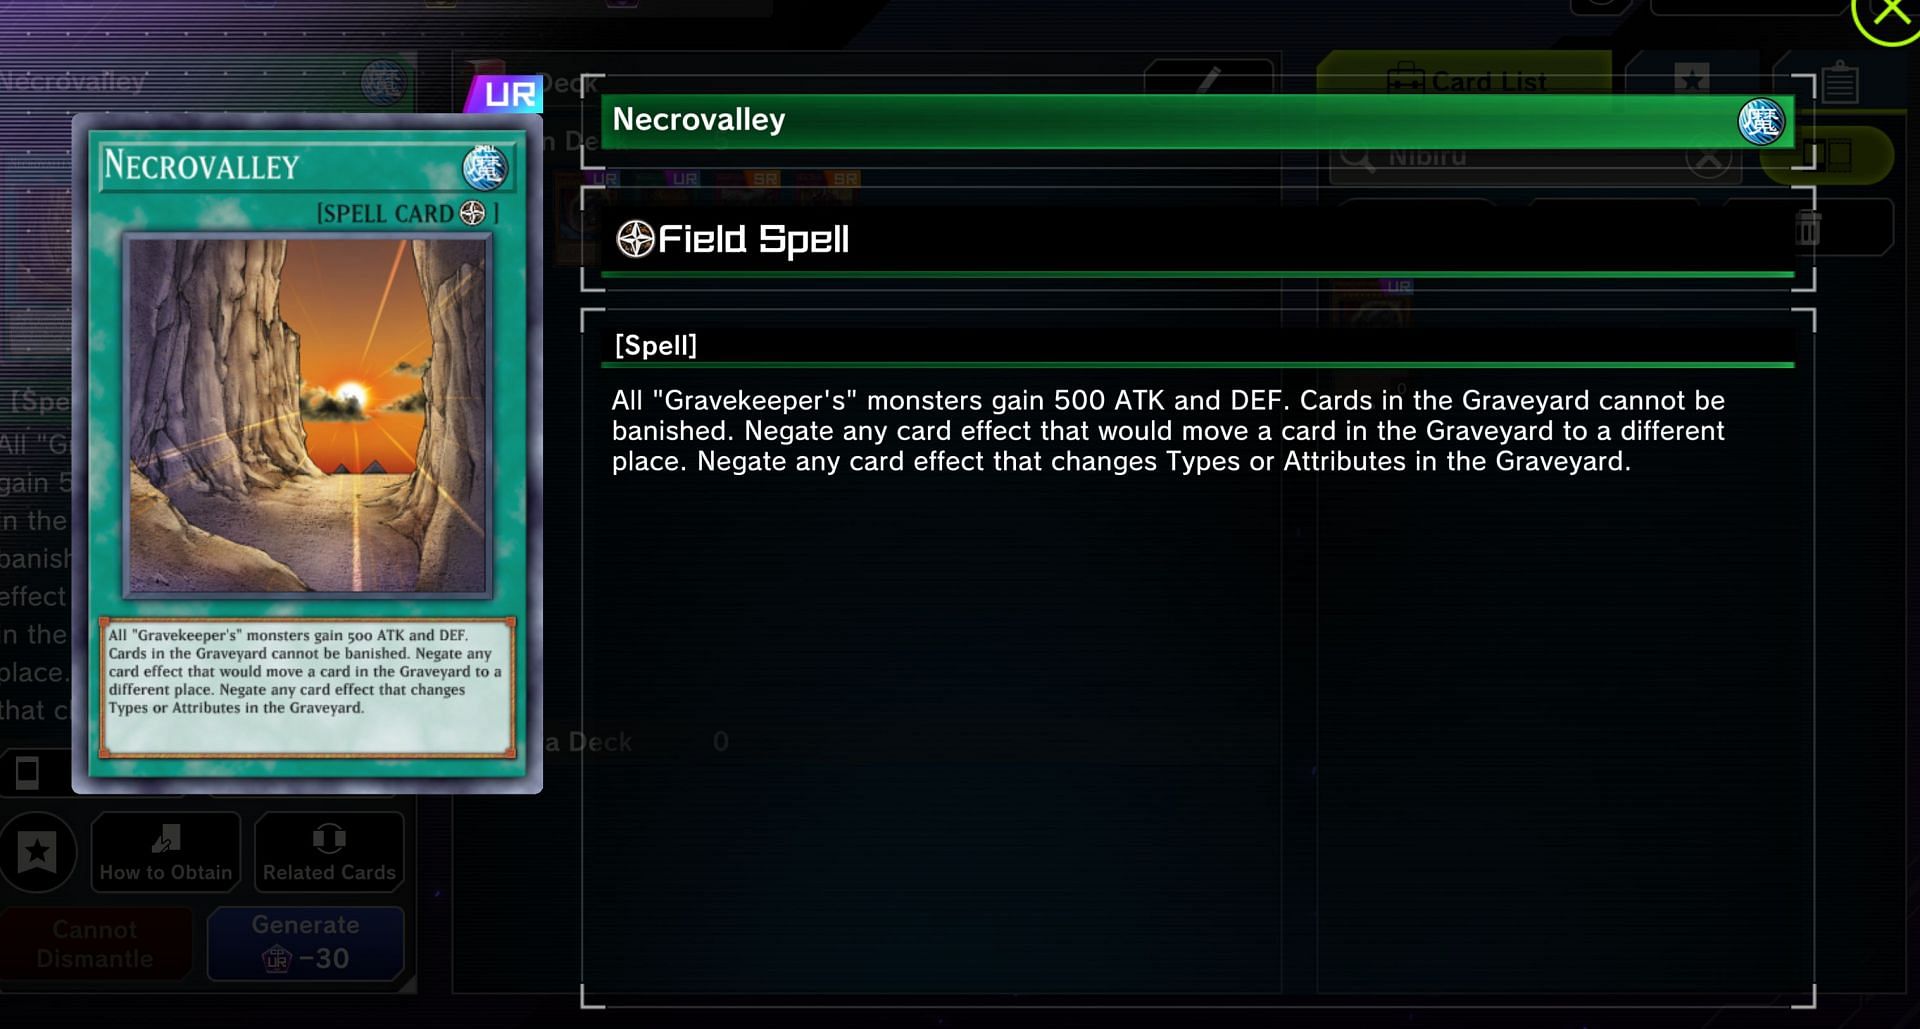 Necrovalley is an amazing card for stopping any and all graveyard nonsense in Yu-Gi-Oh! Master Duel (Image via Konami)